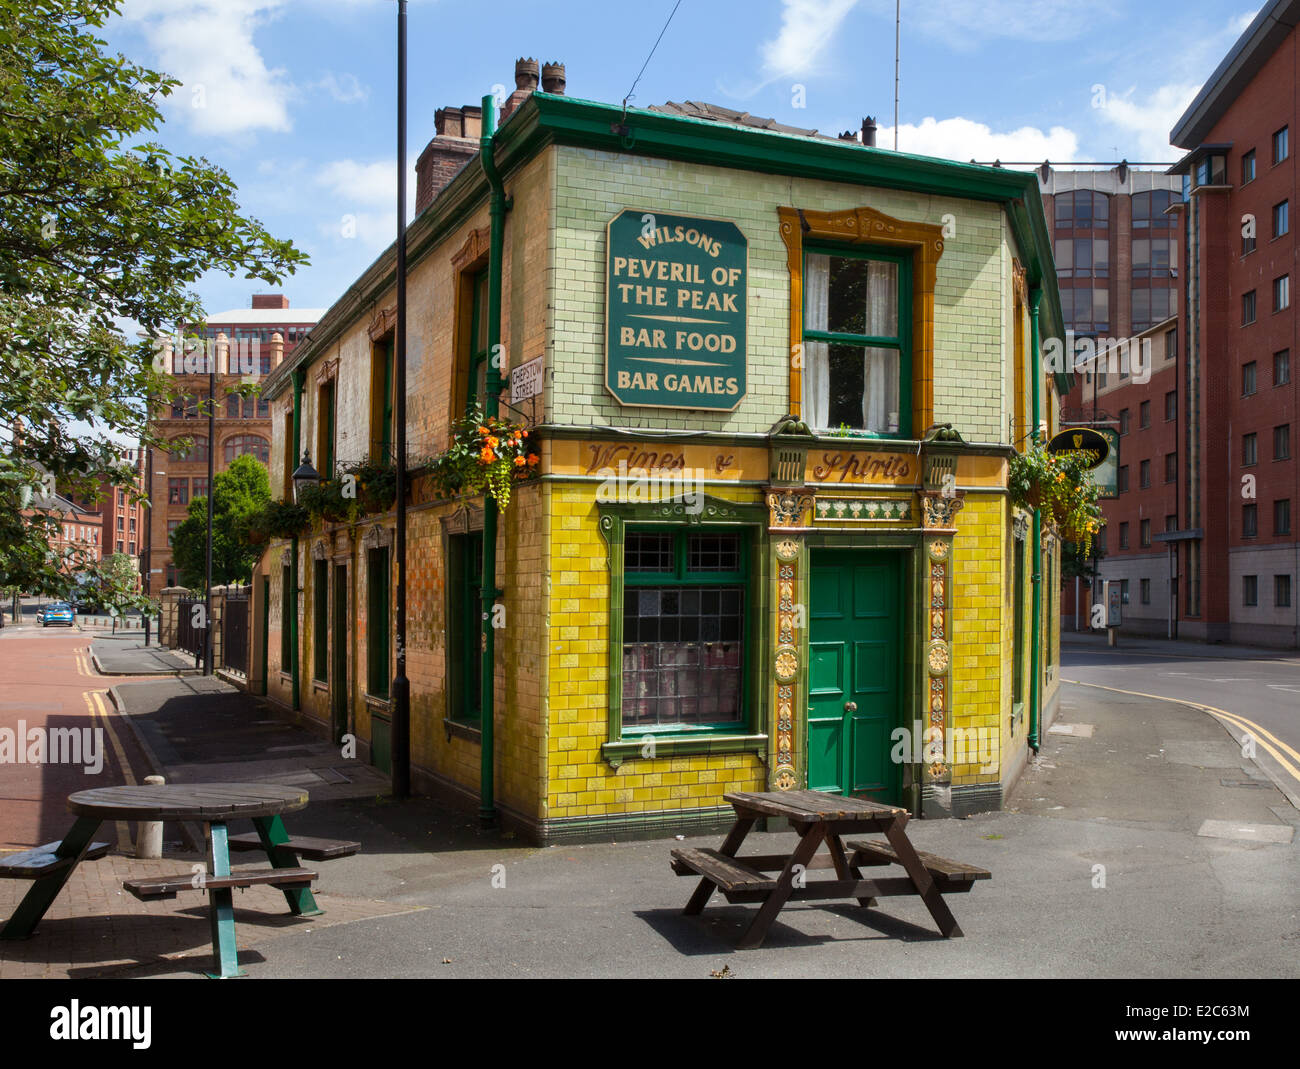 Peveril of the Peak is a Grade II listed building. a  Public house and hostelry in Great Bridgewater Street, Manchester, UK Stock Photo